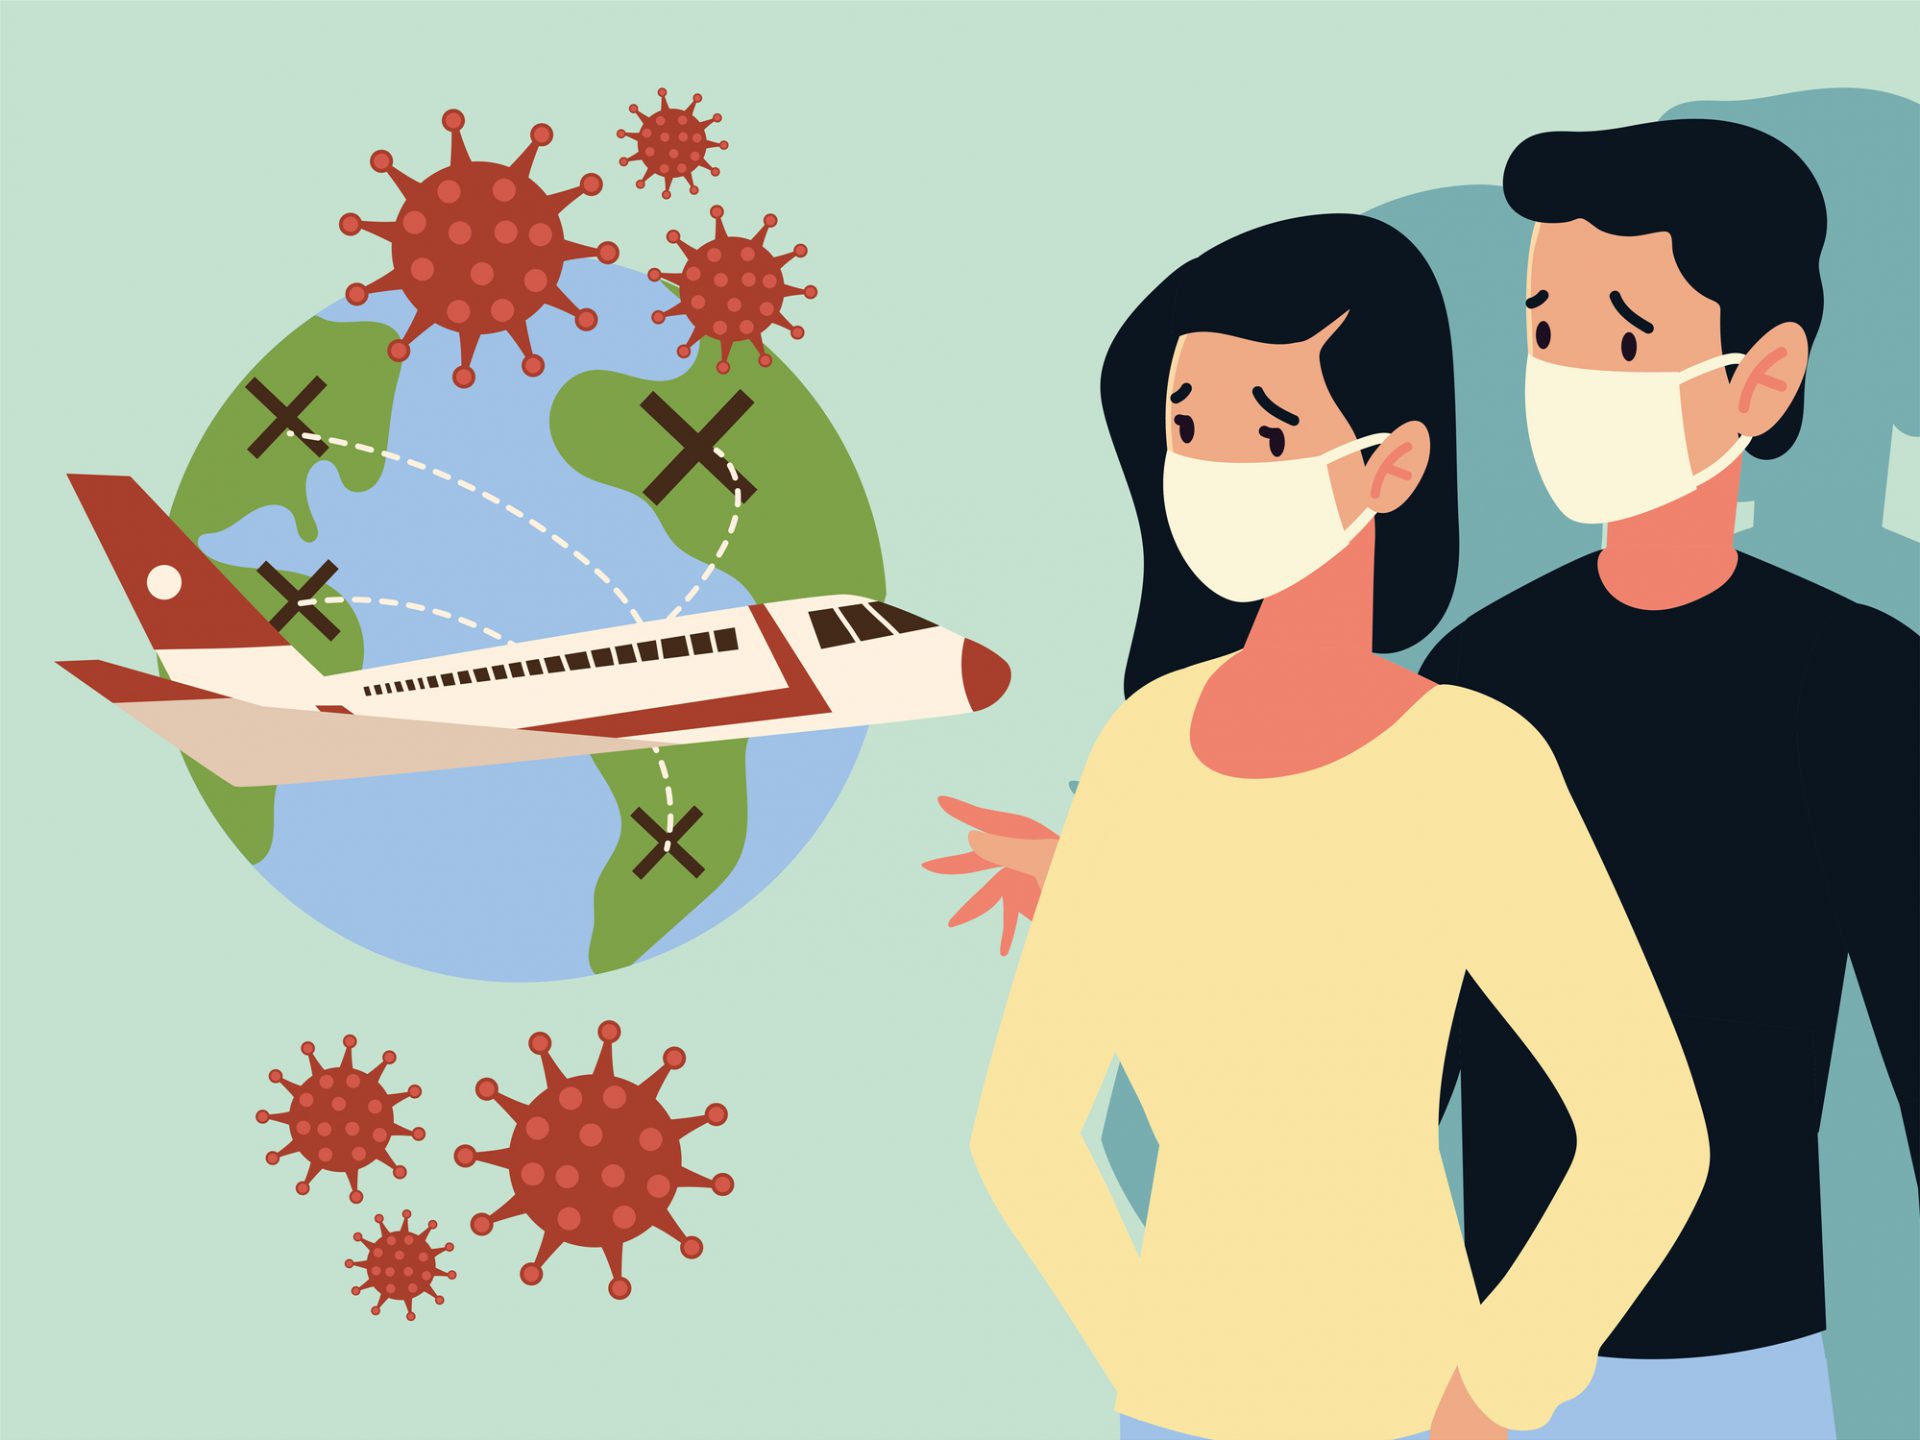 crisis airline and travel tourism business from the outbreak of the disease coronavirus covid 19 vector illustration